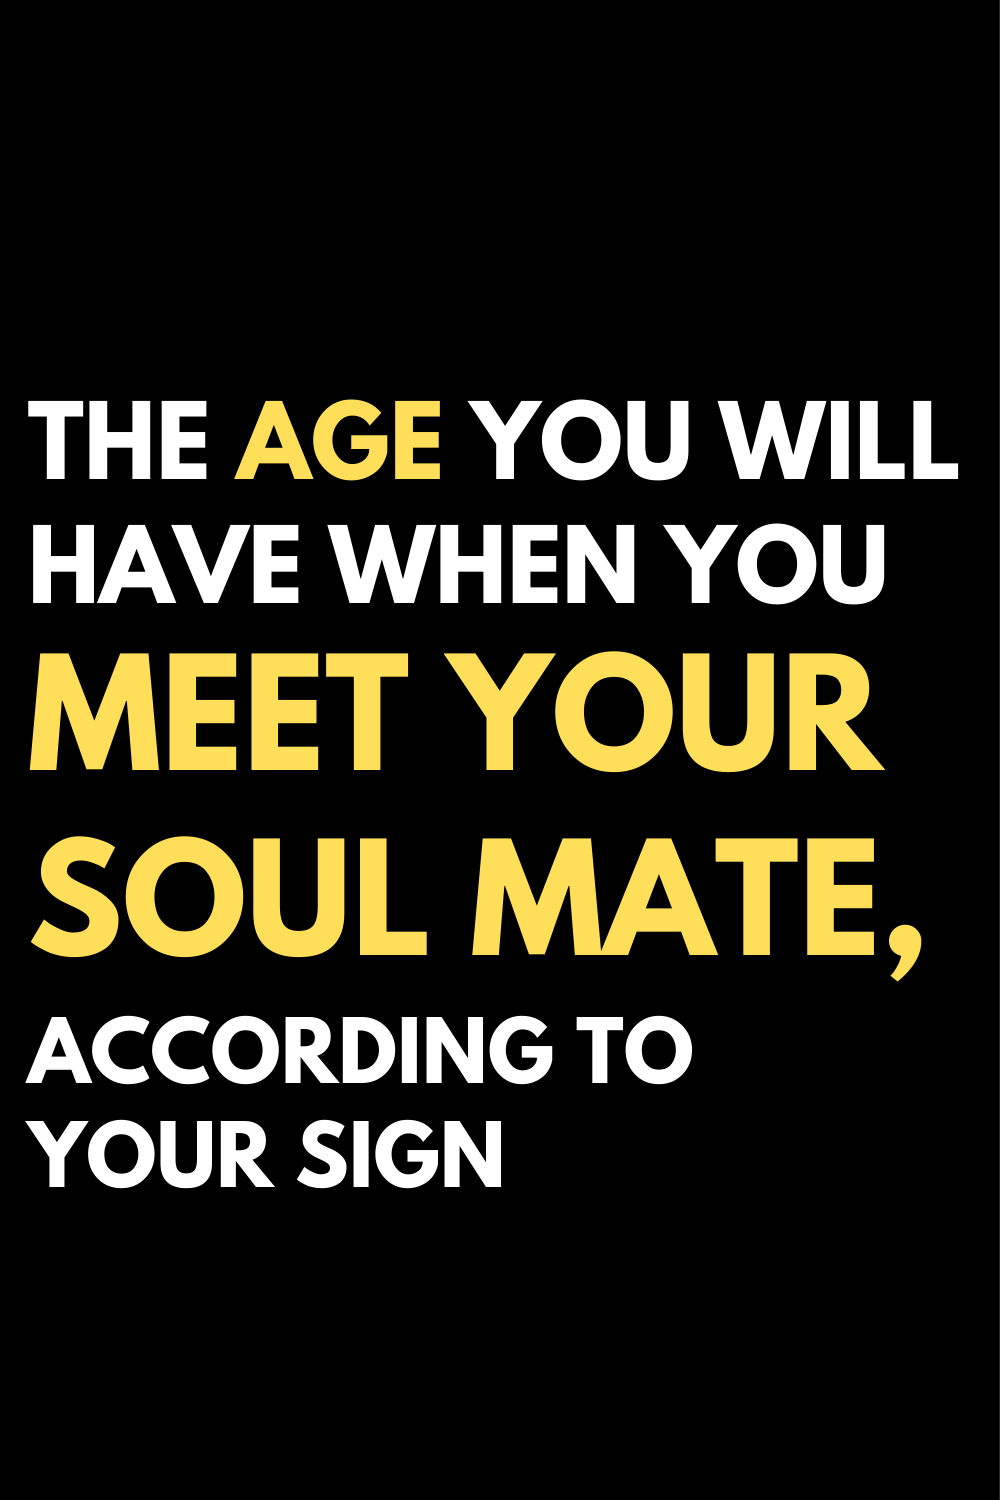 The age you will have when you meet your soul mate, according to your sign